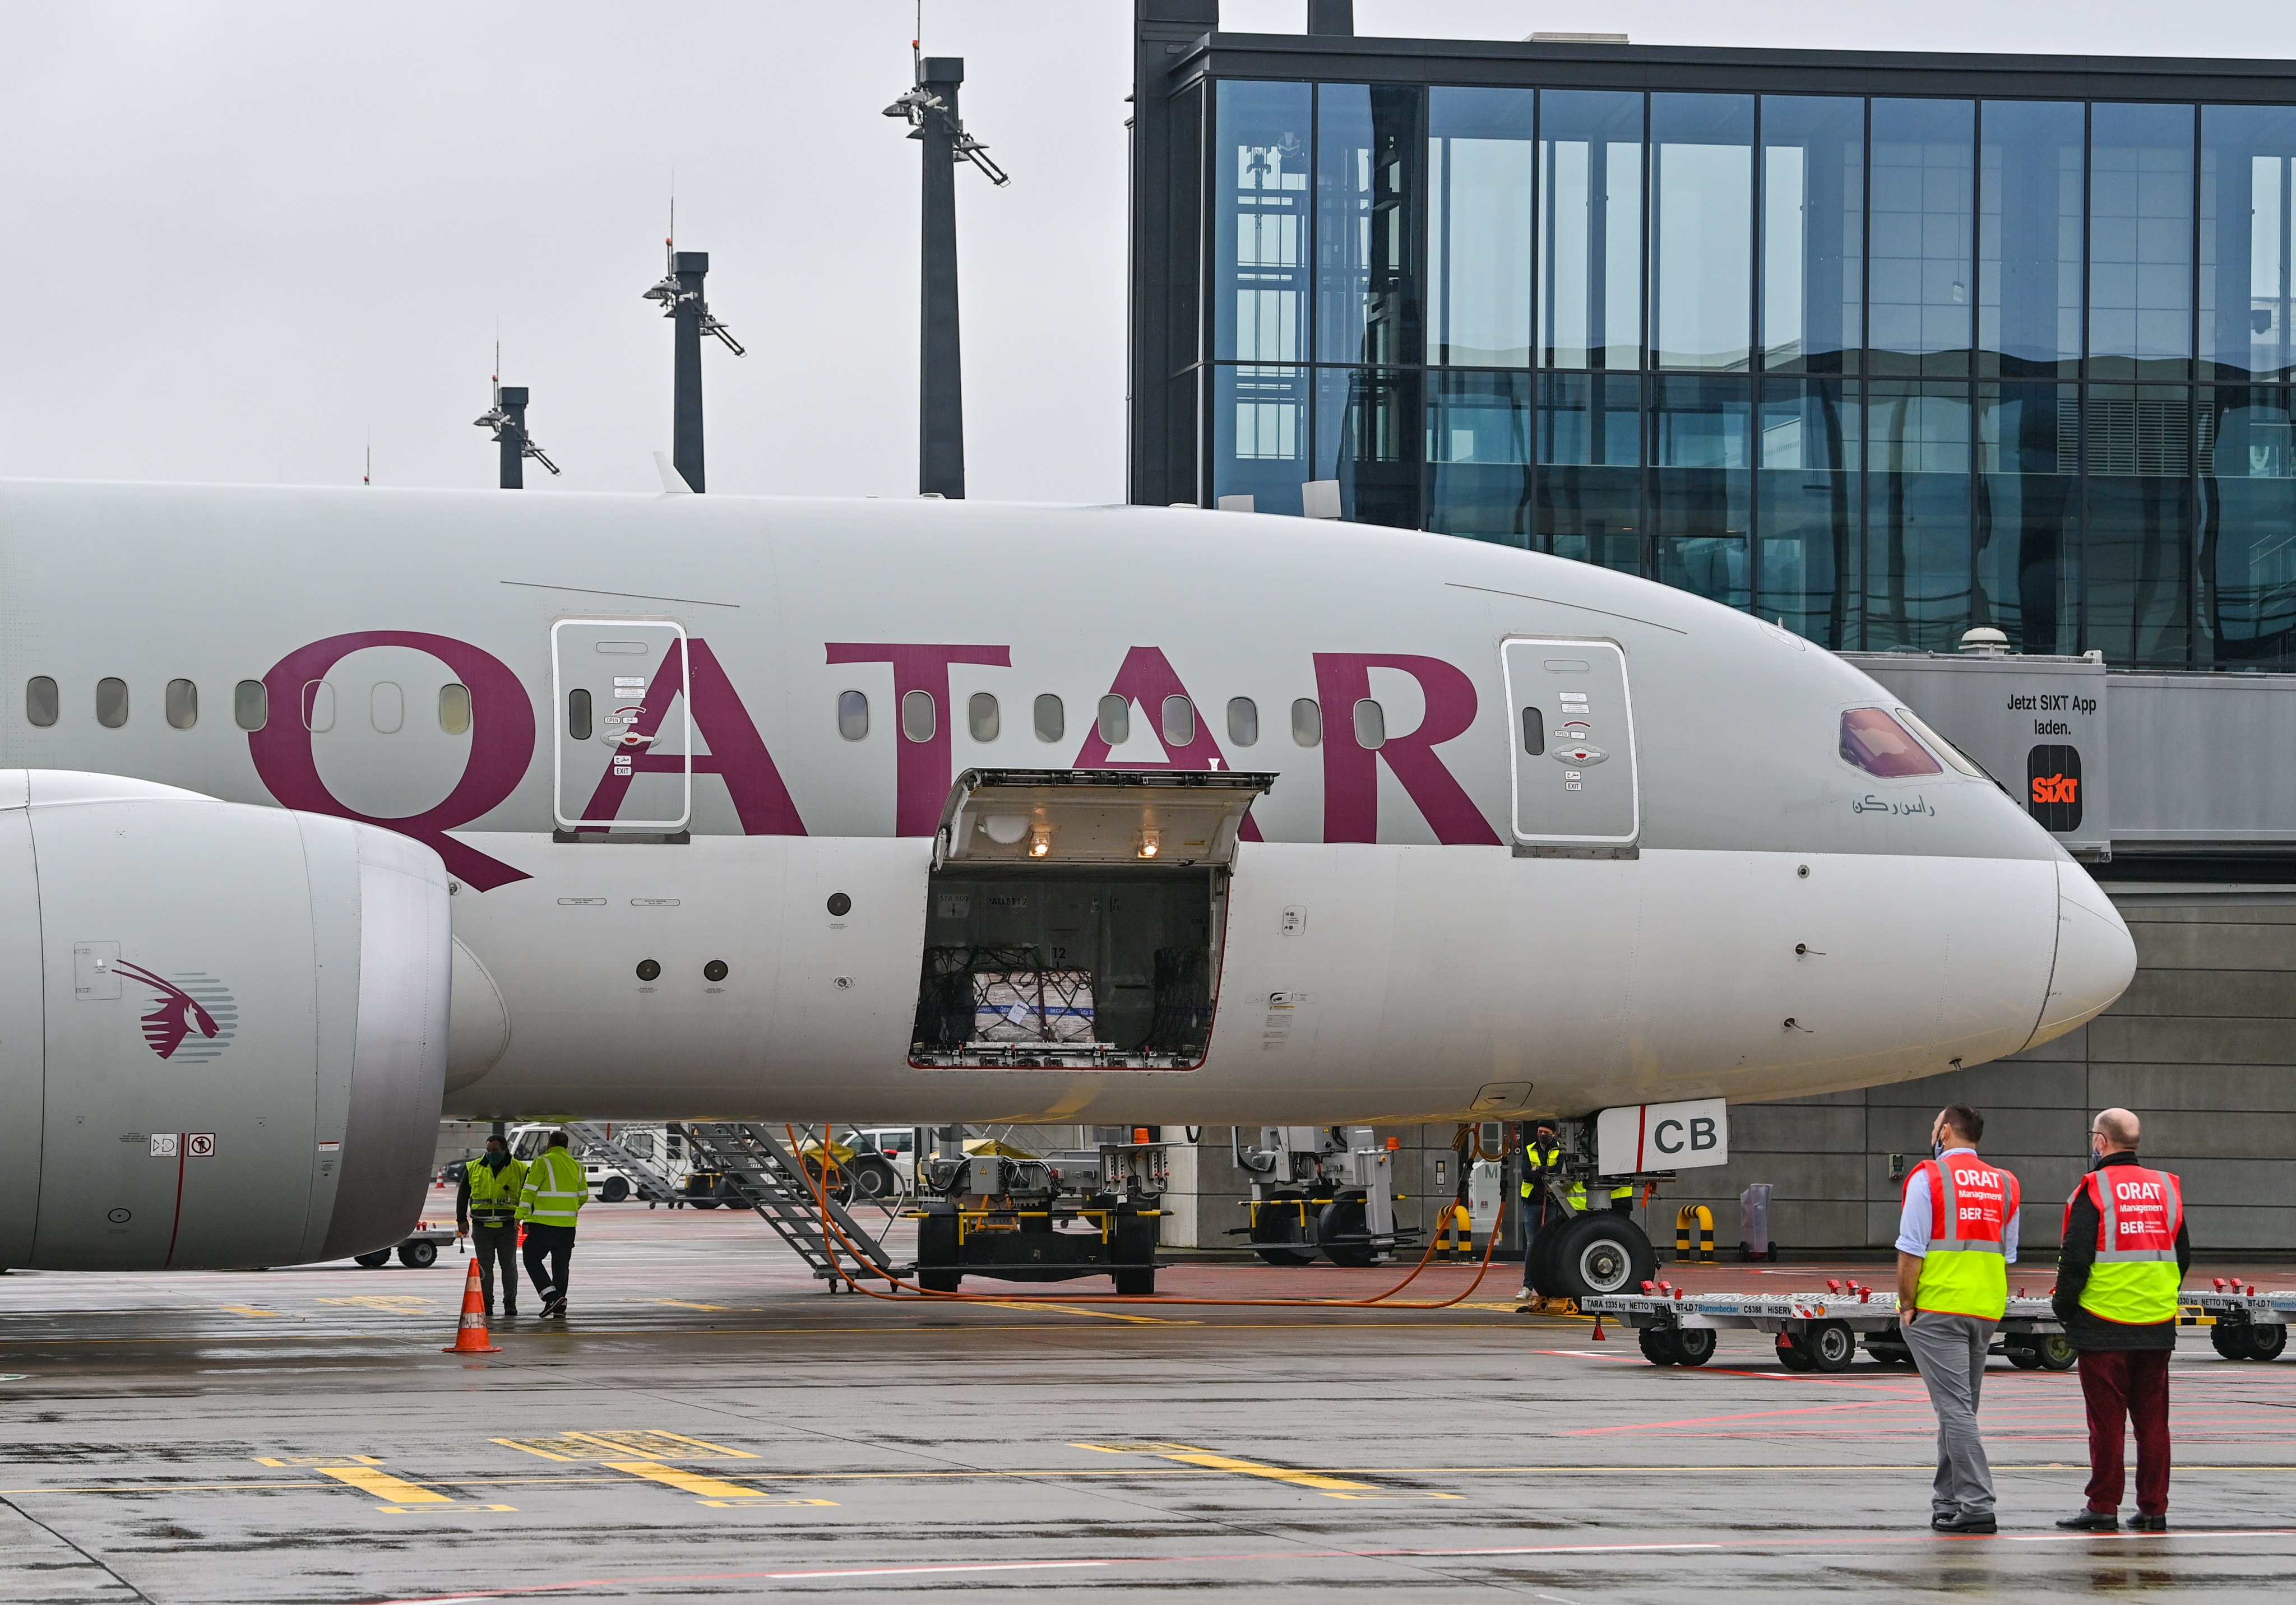 A Boeing 787 (Dreamliner) of Qatar Airways at a gate at the Berlin Airport.  A Qatar Airways flight was delayed in Athens due to a technical issue in intense heat. Photo: dpa